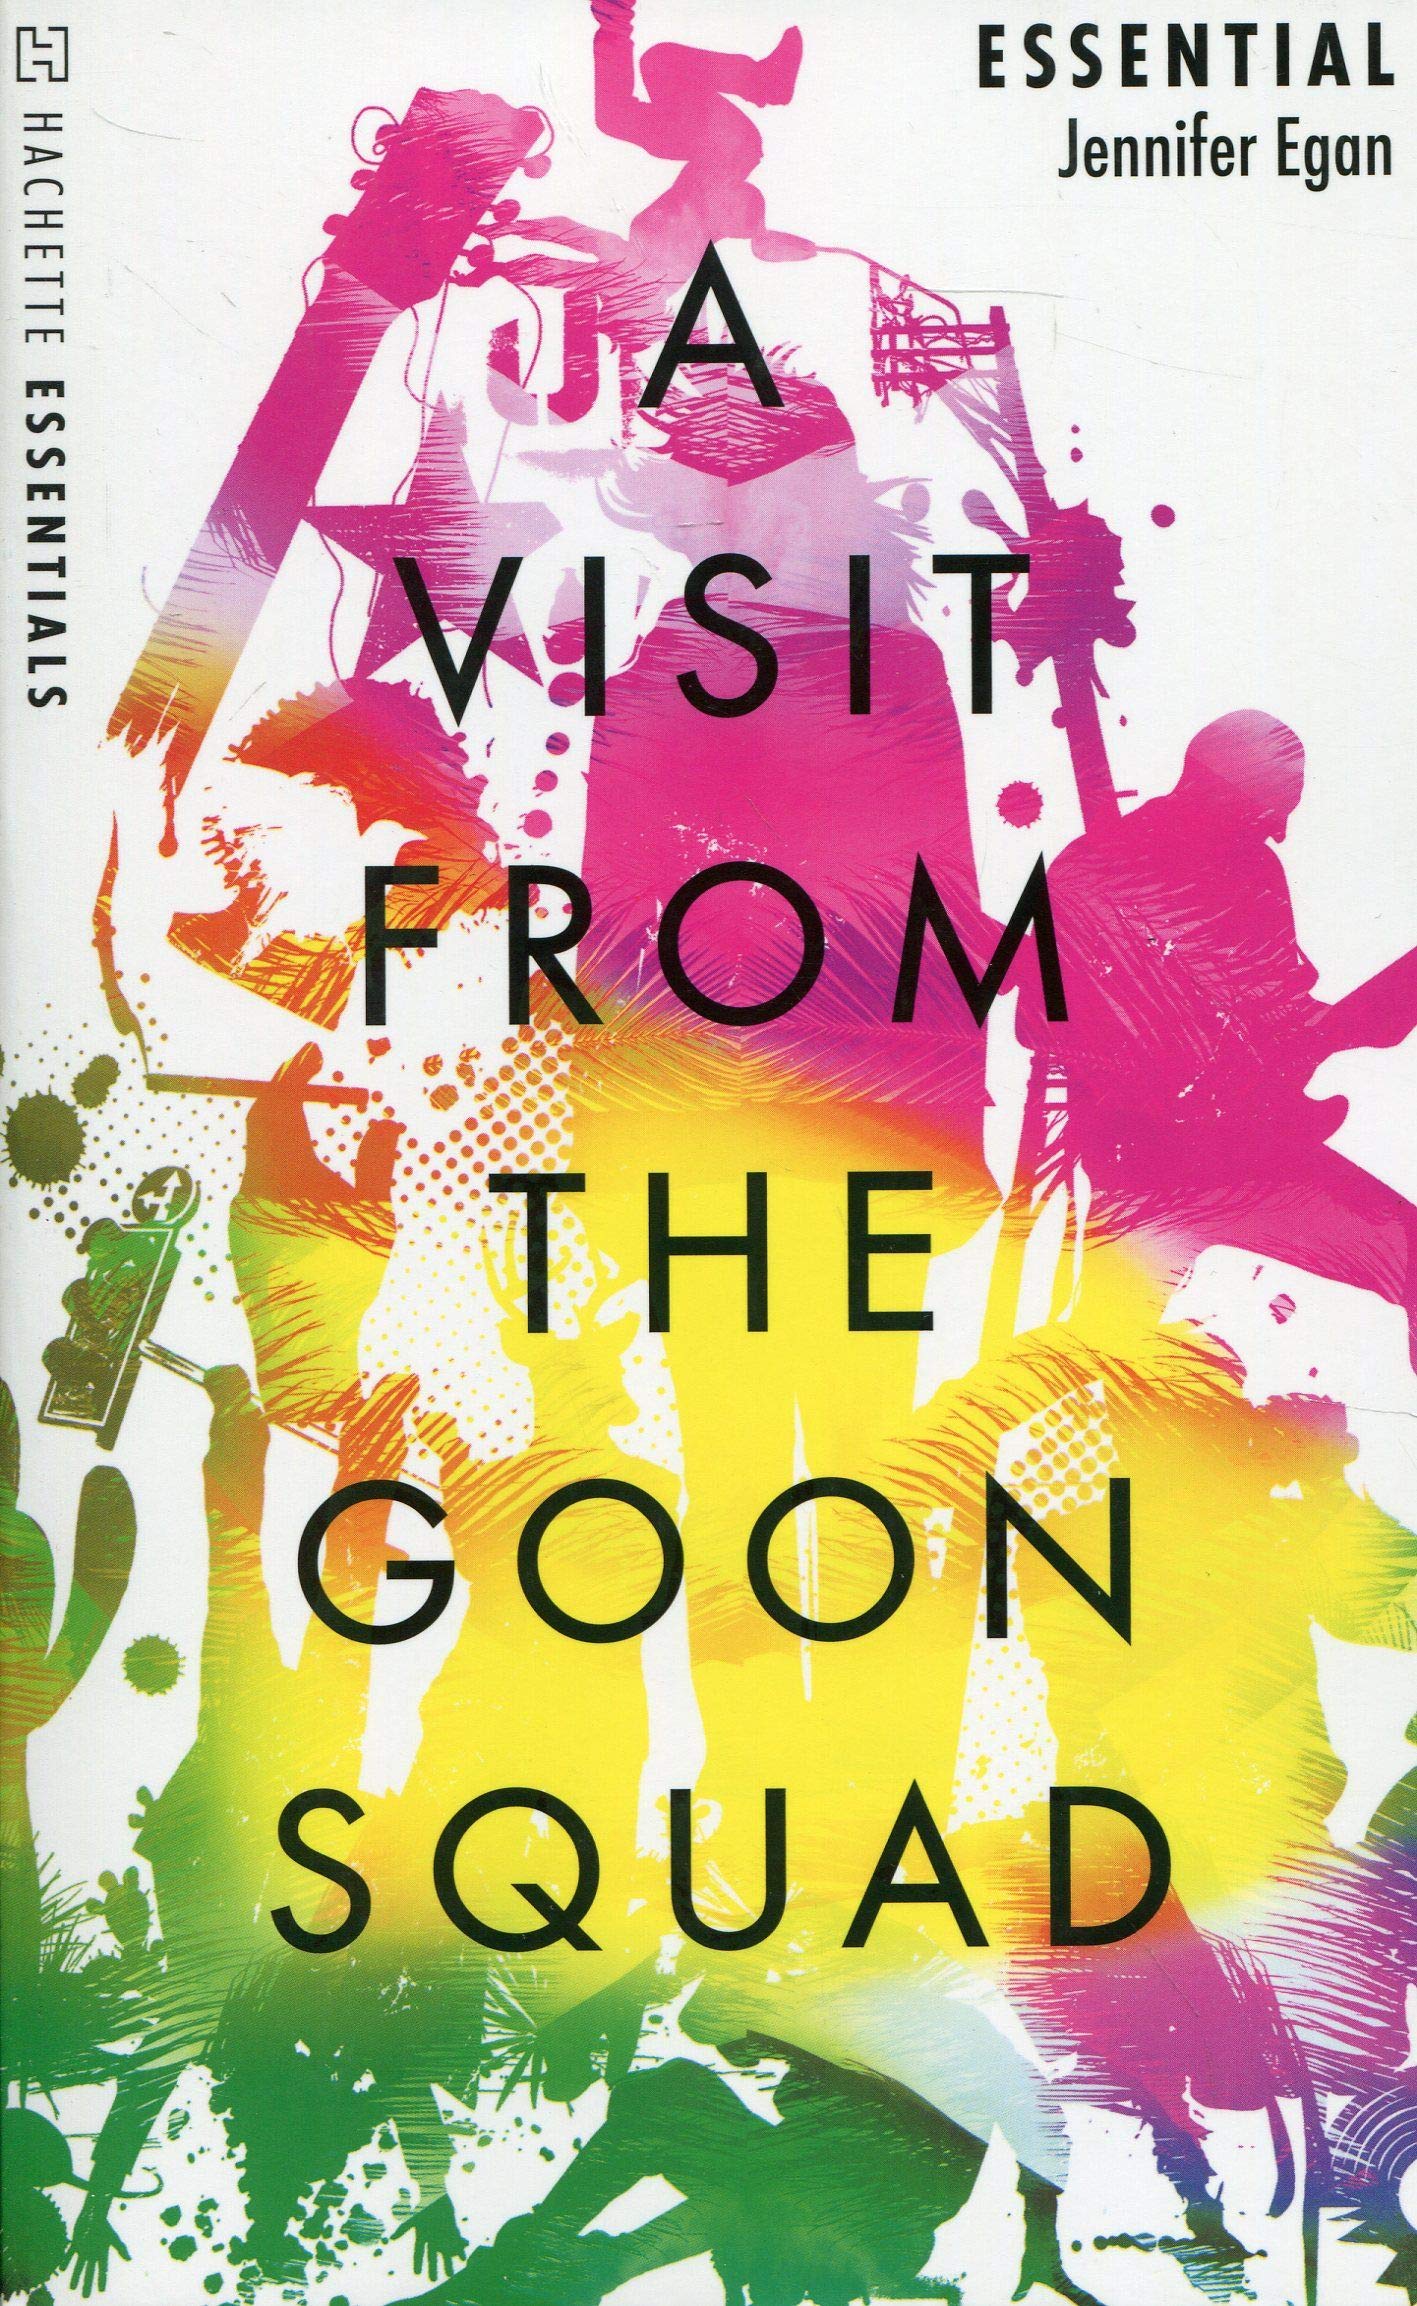 author of a visit from the goon squad crossword